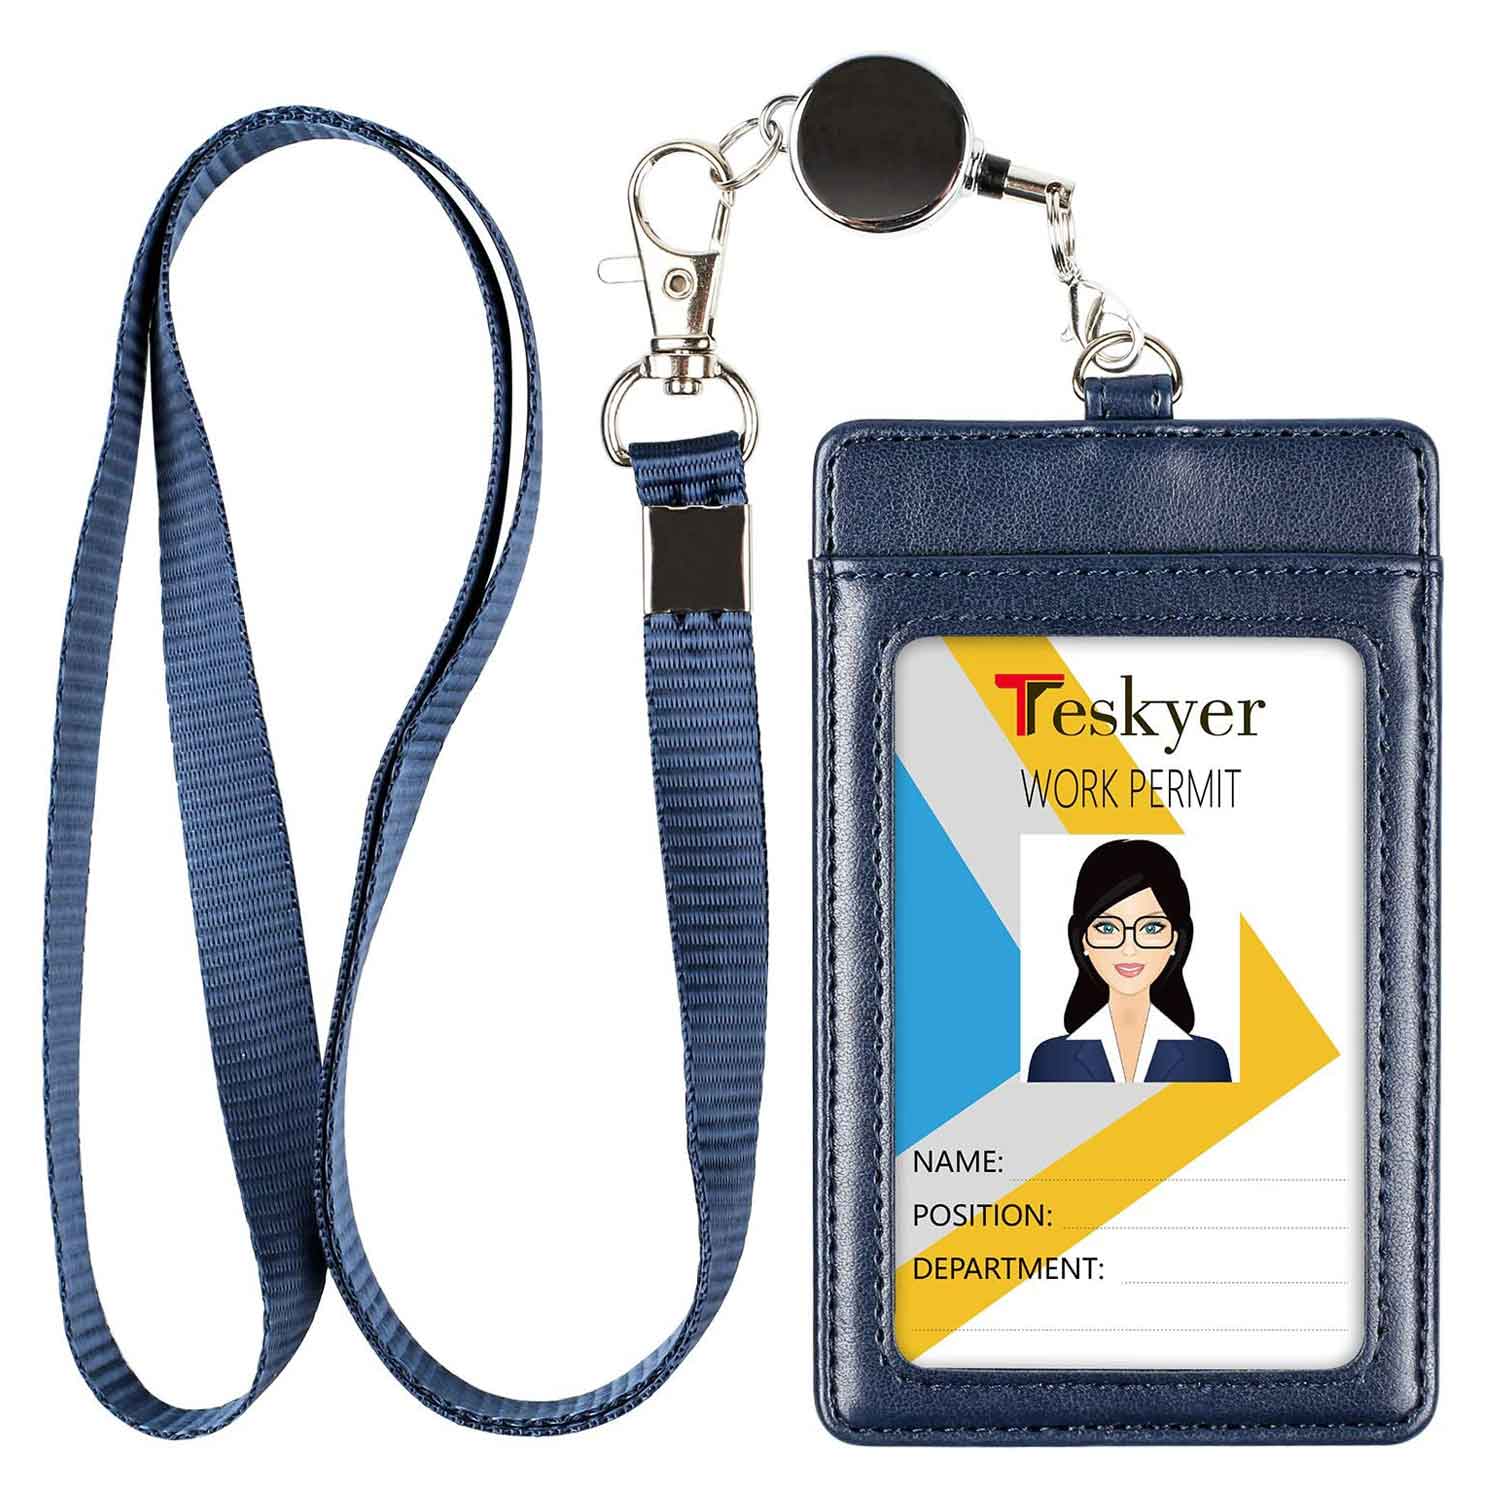 Wisdompro Badge Holder with Retractable Reel, Vertical PU Leather ID Card  Holder with Side Zipper Po…See more Wisdompro Badge Holder with Retractable